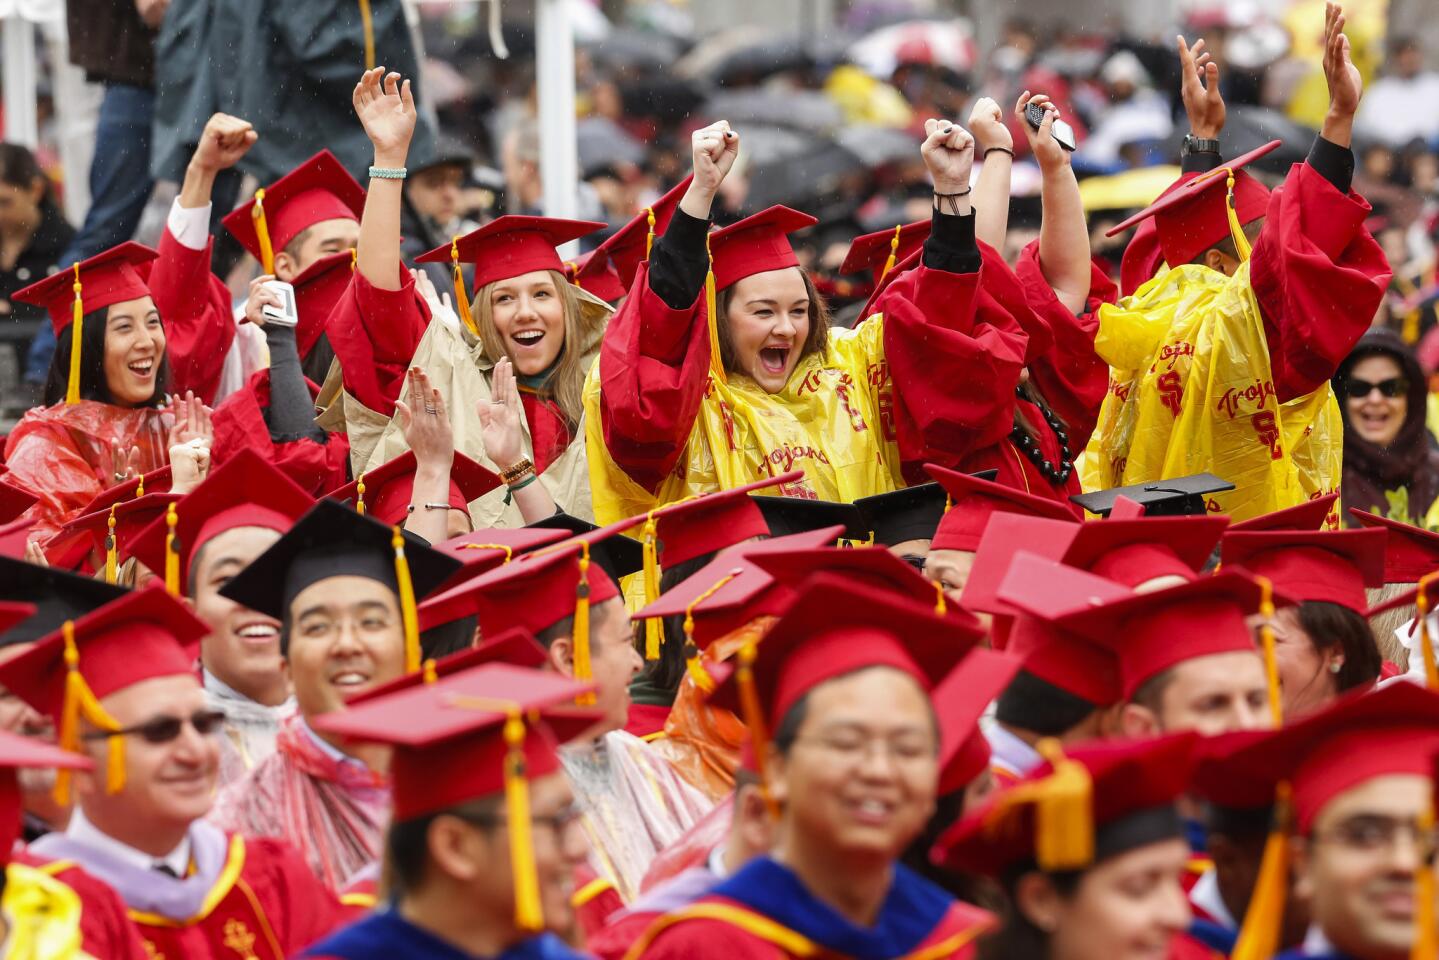 USC graduates wear ponchos over their caps and gowns while cheering in the rain during commencement ceremonies.